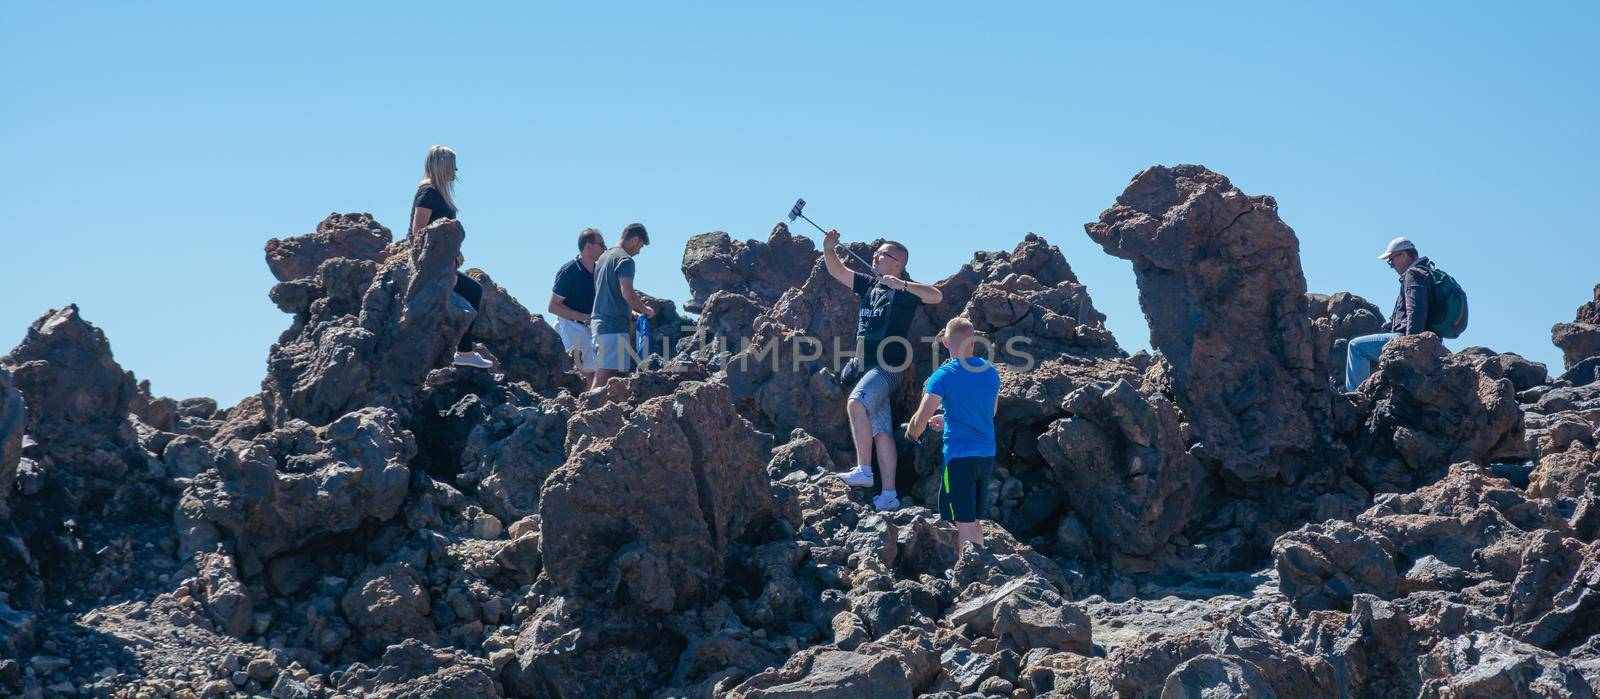 Spain, Tenerife - 09/15/2016: Tourists photo session on the volcanic rocks of Teide volcano by Grommik